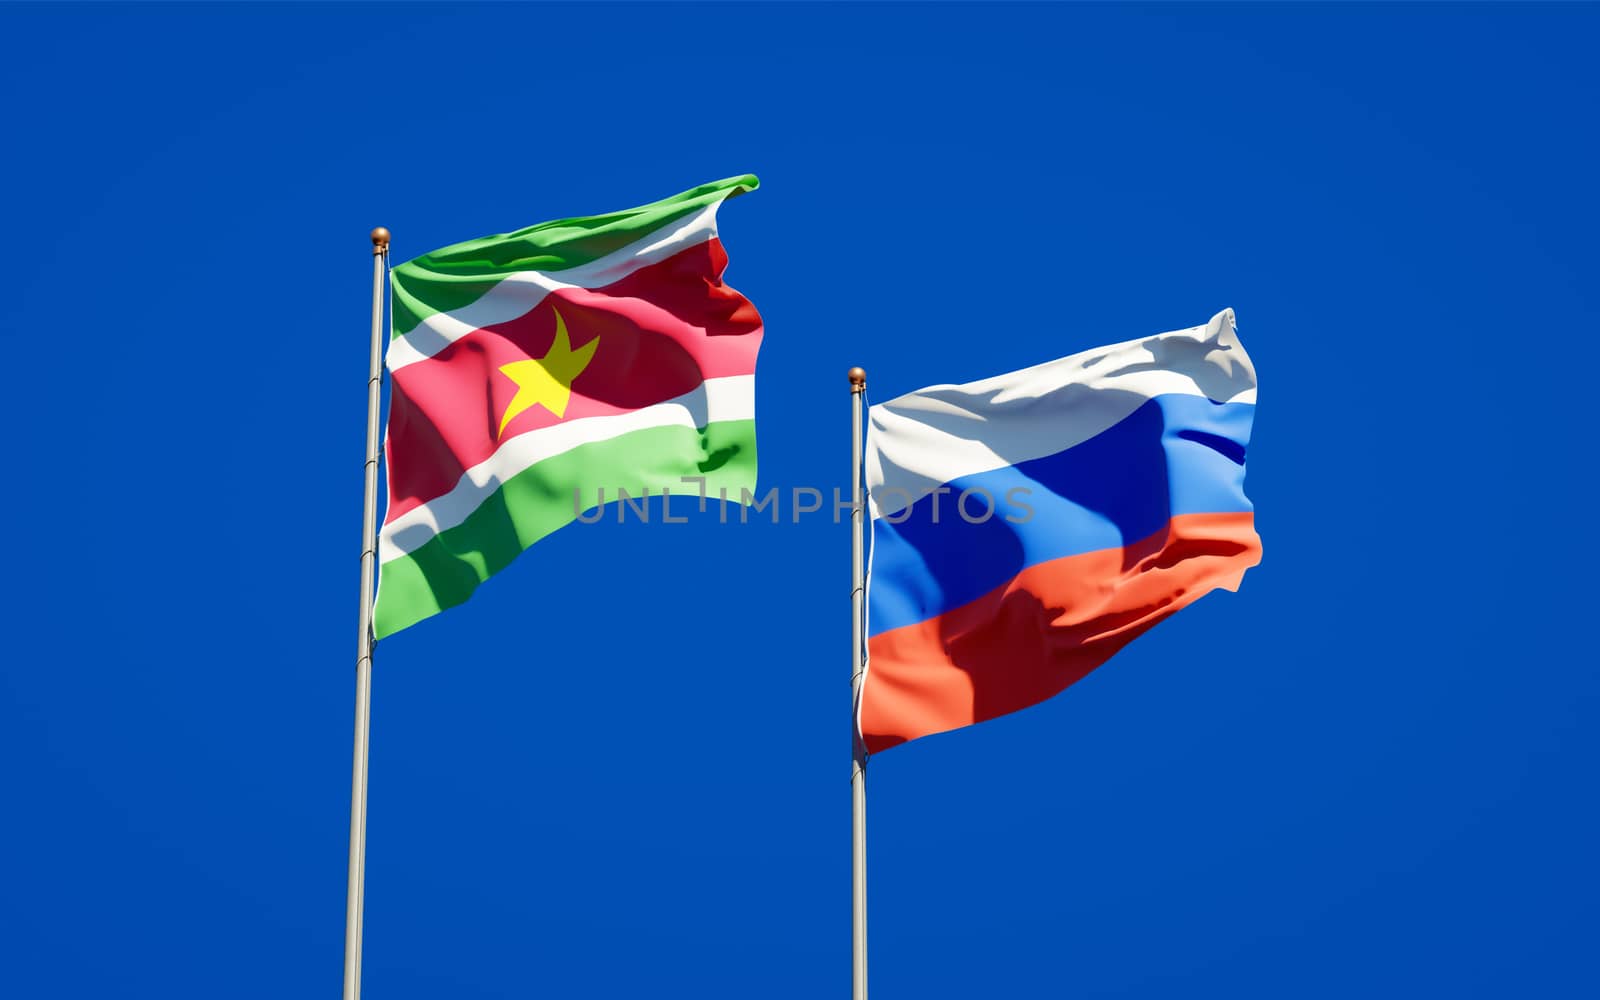 Beautiful national state flags of Suriname and Russia together at the sky background. 3D artwork concept. 